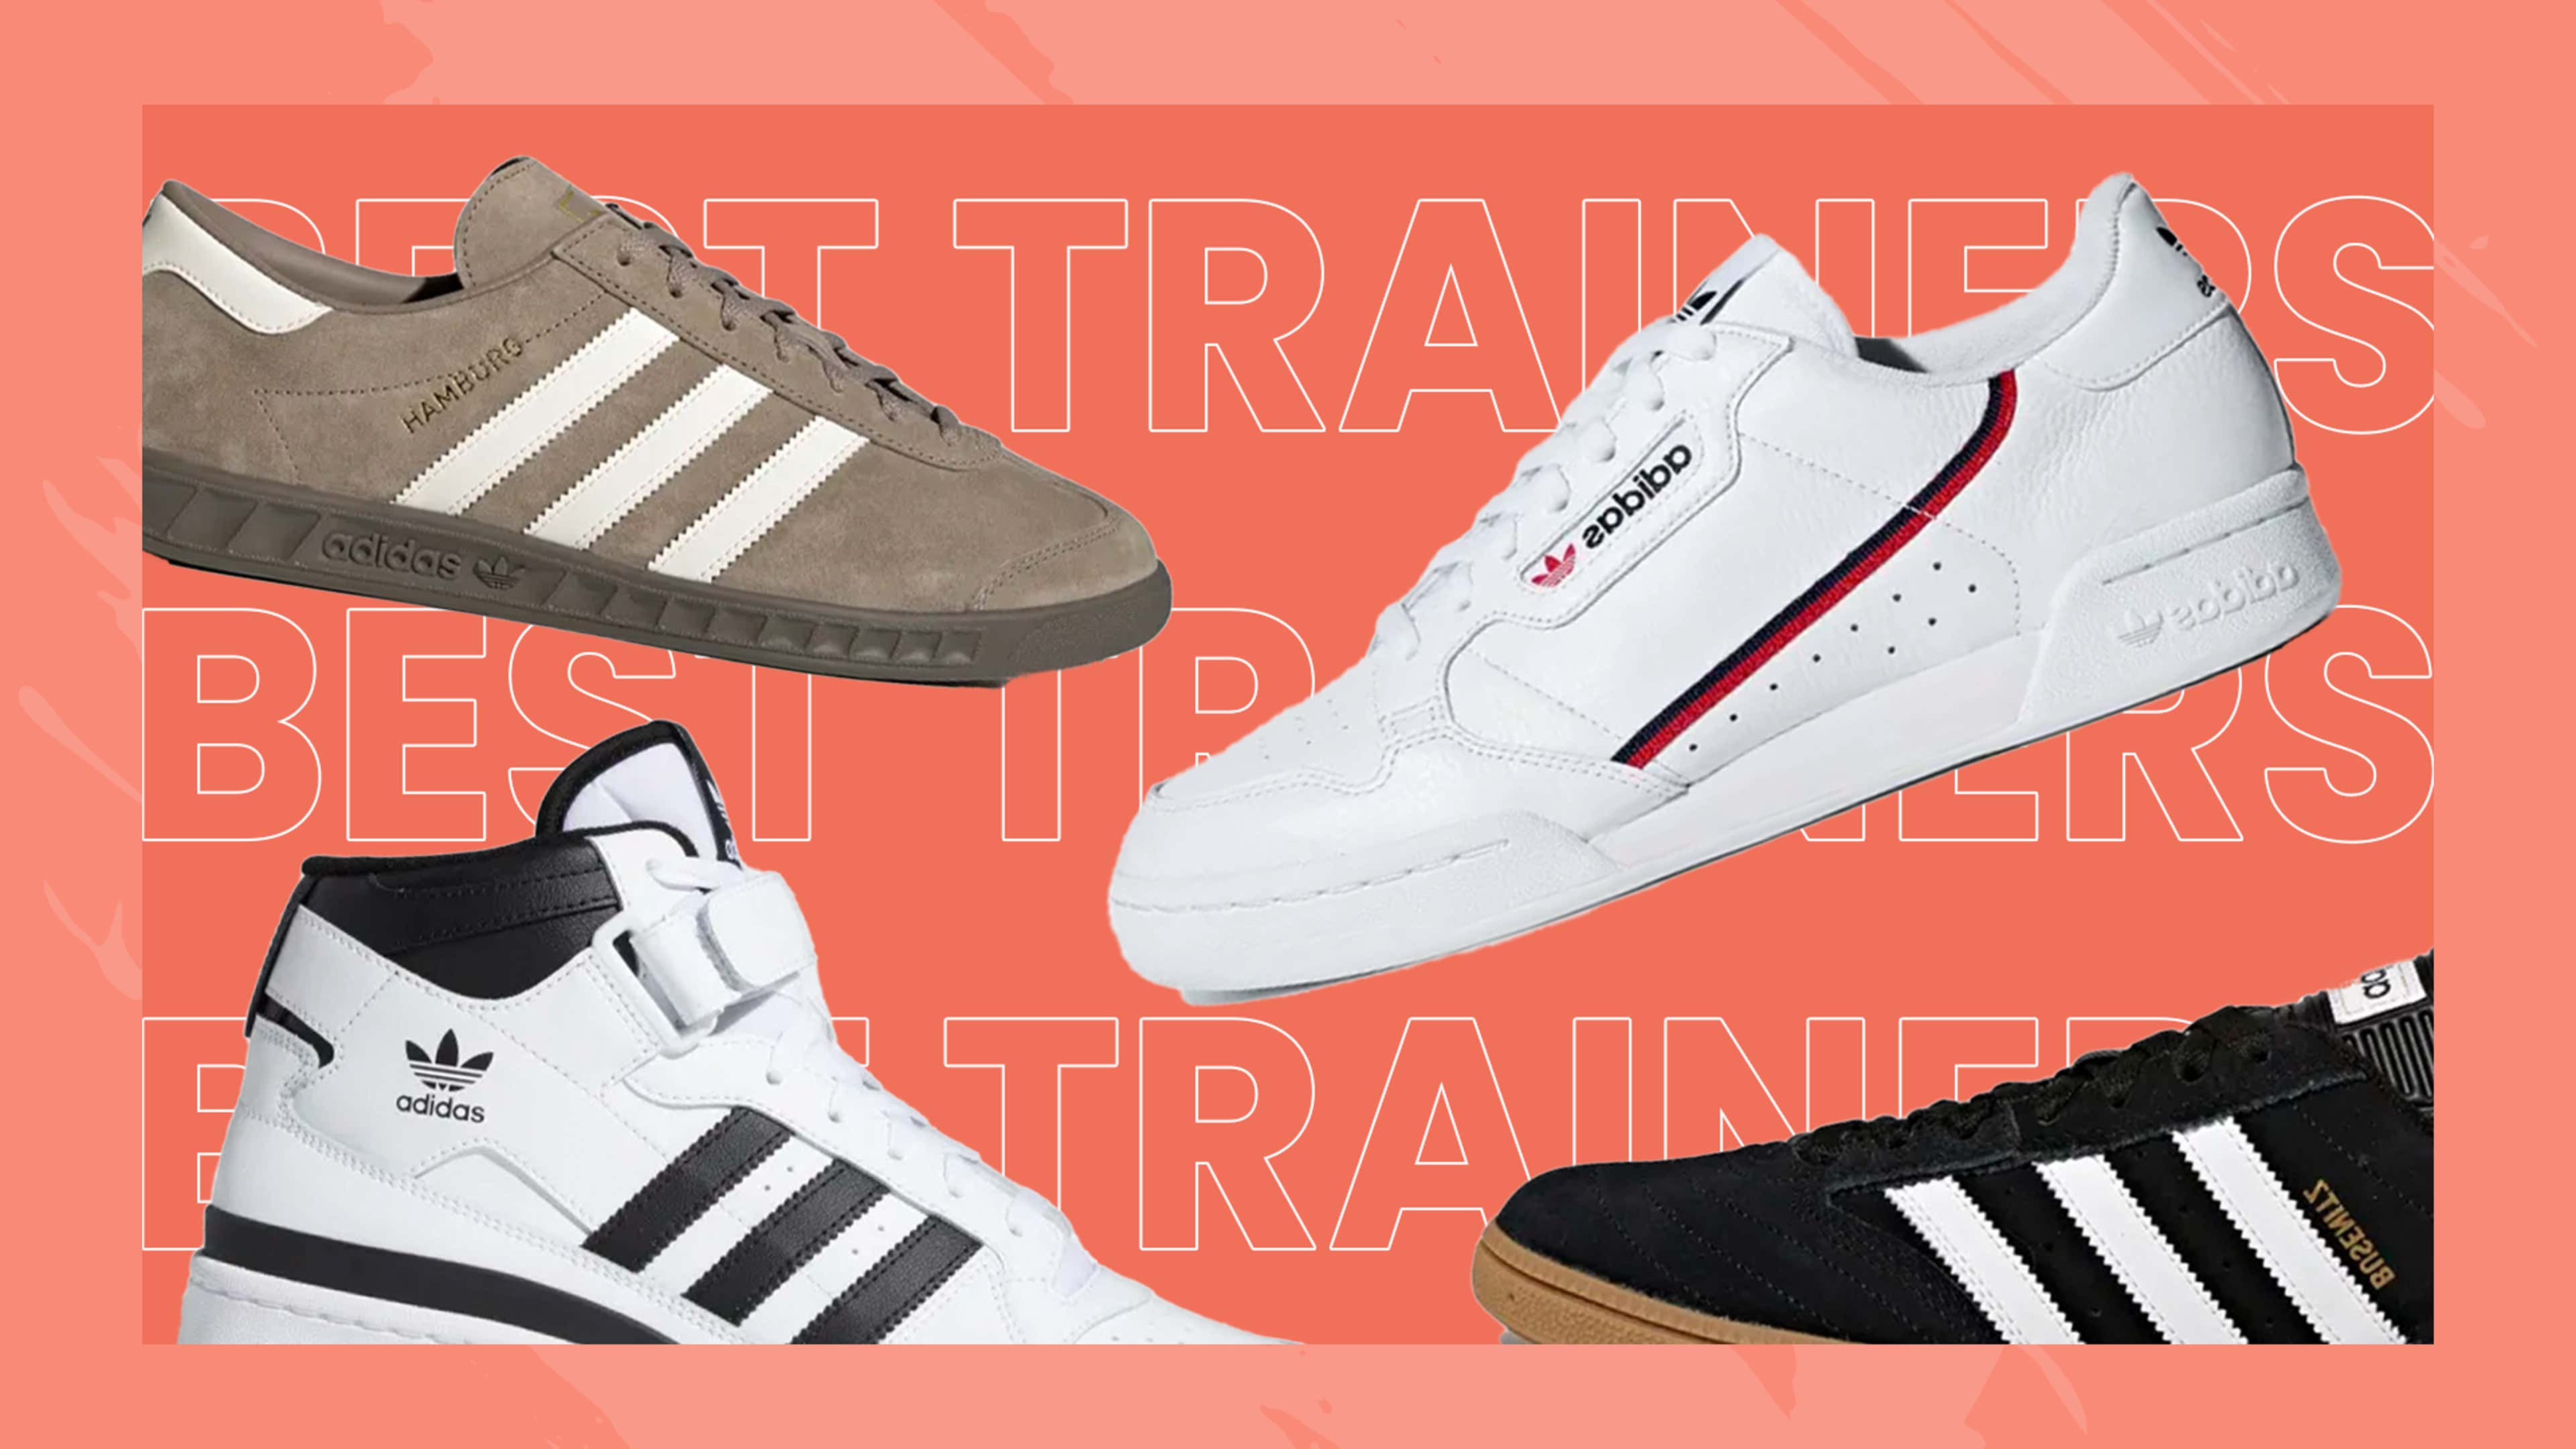 The Best Adidas Originals Trainers You Can Buy In 2023 | Goal.Com Singapore